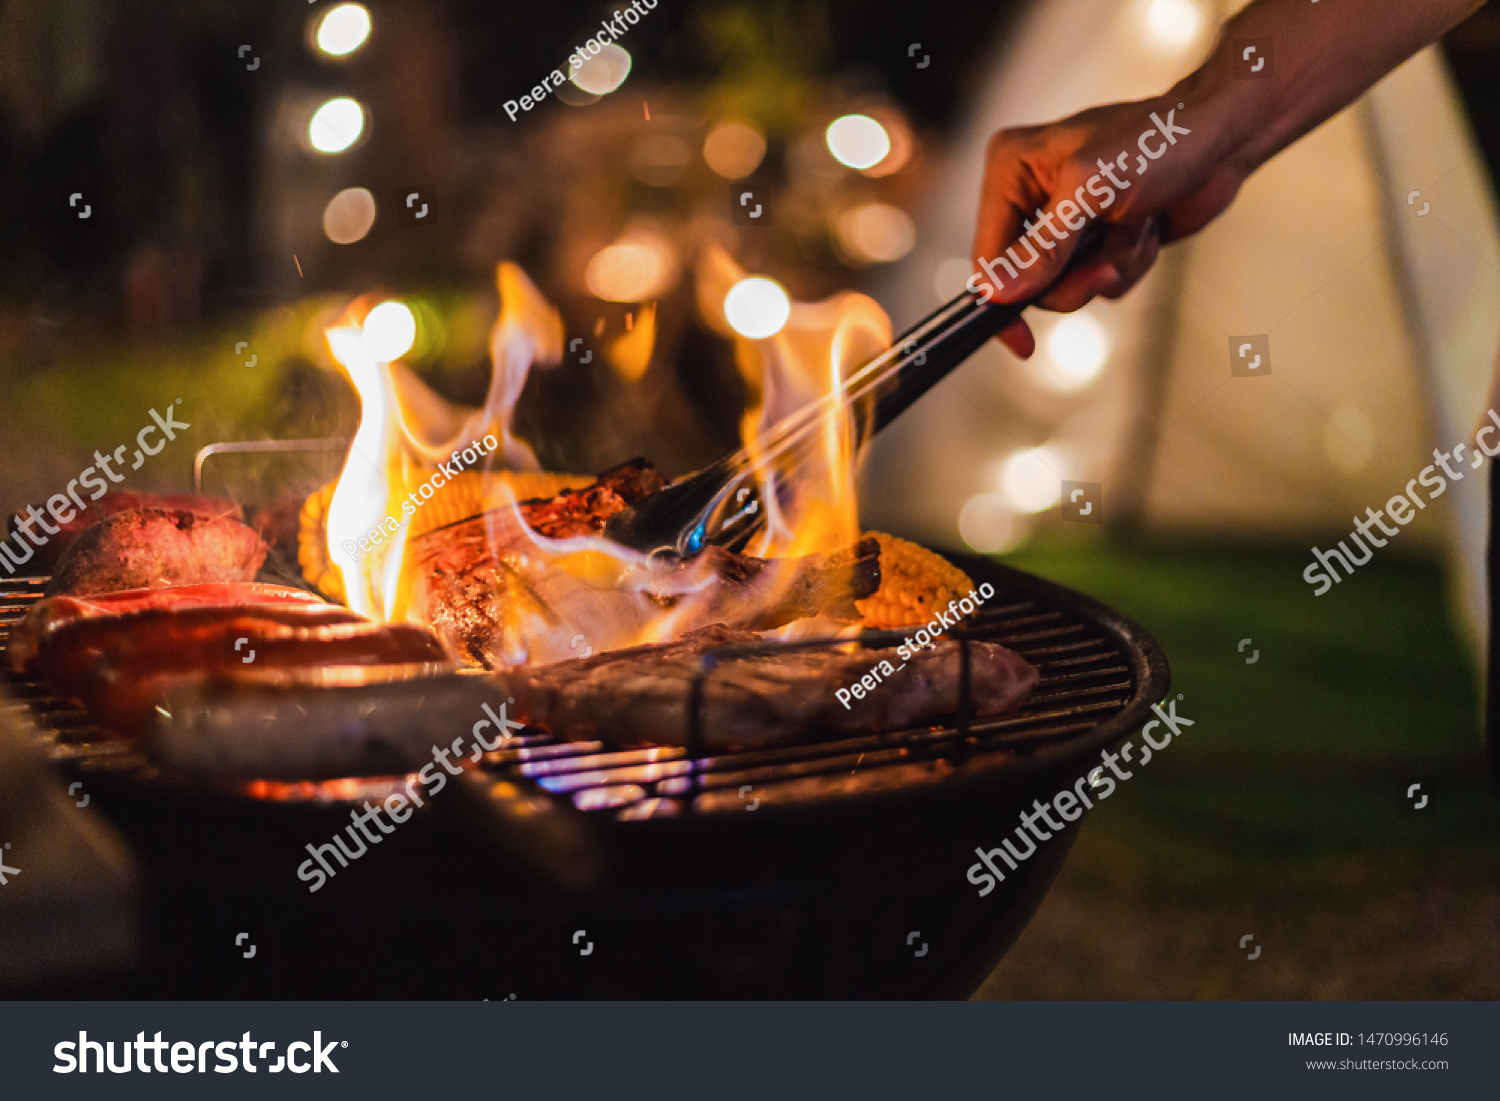 Family making barbecue in dinner party camping at night #1470996146